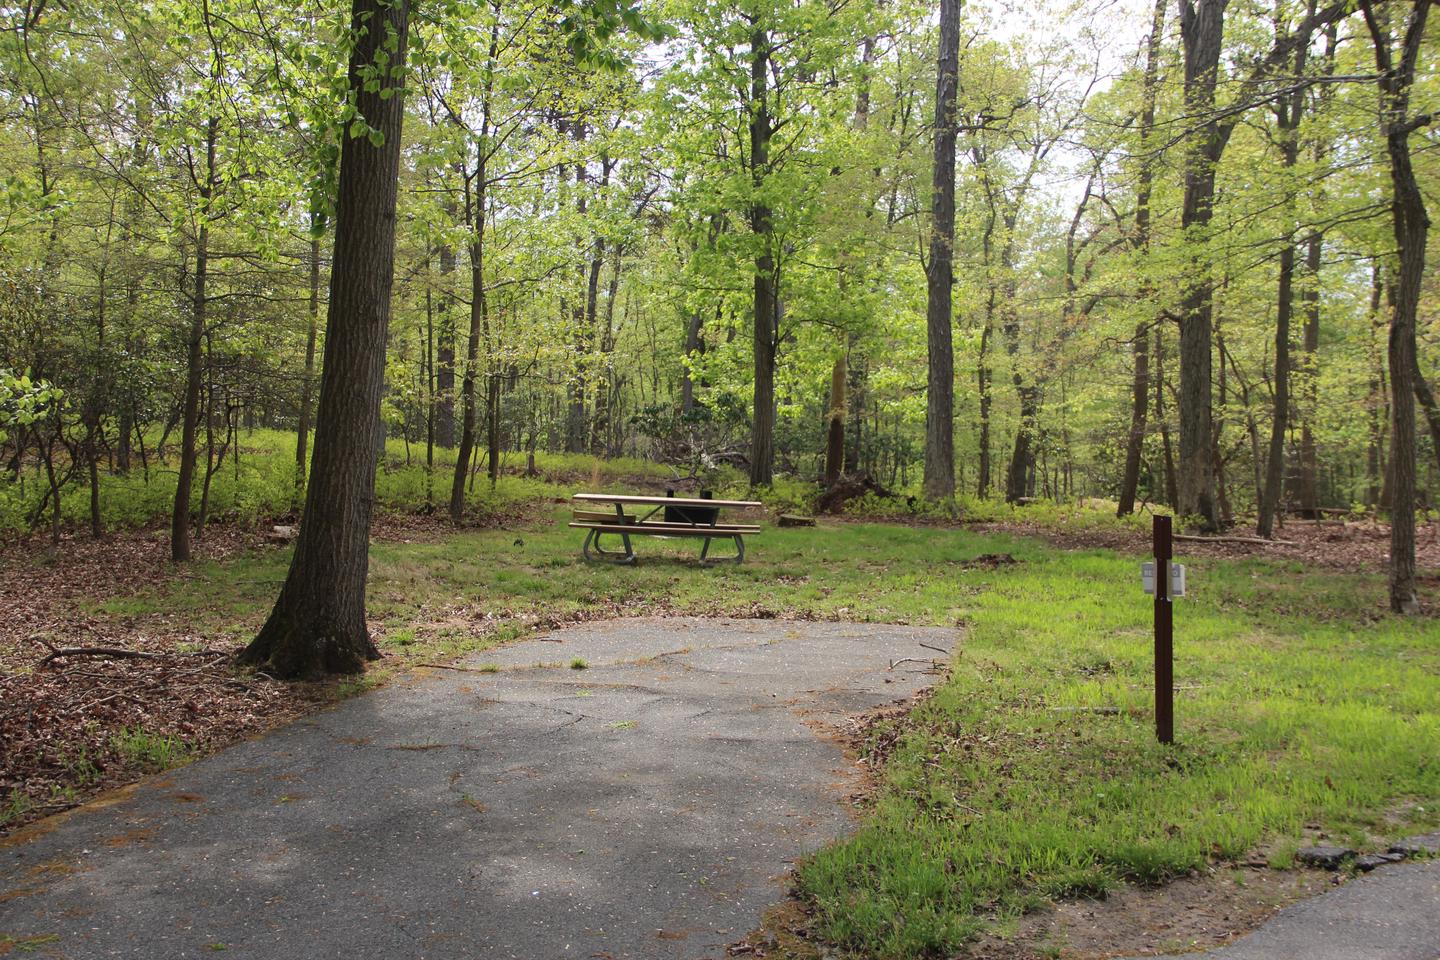 C89 C Loop of the Greenbelt Park Maryland campground